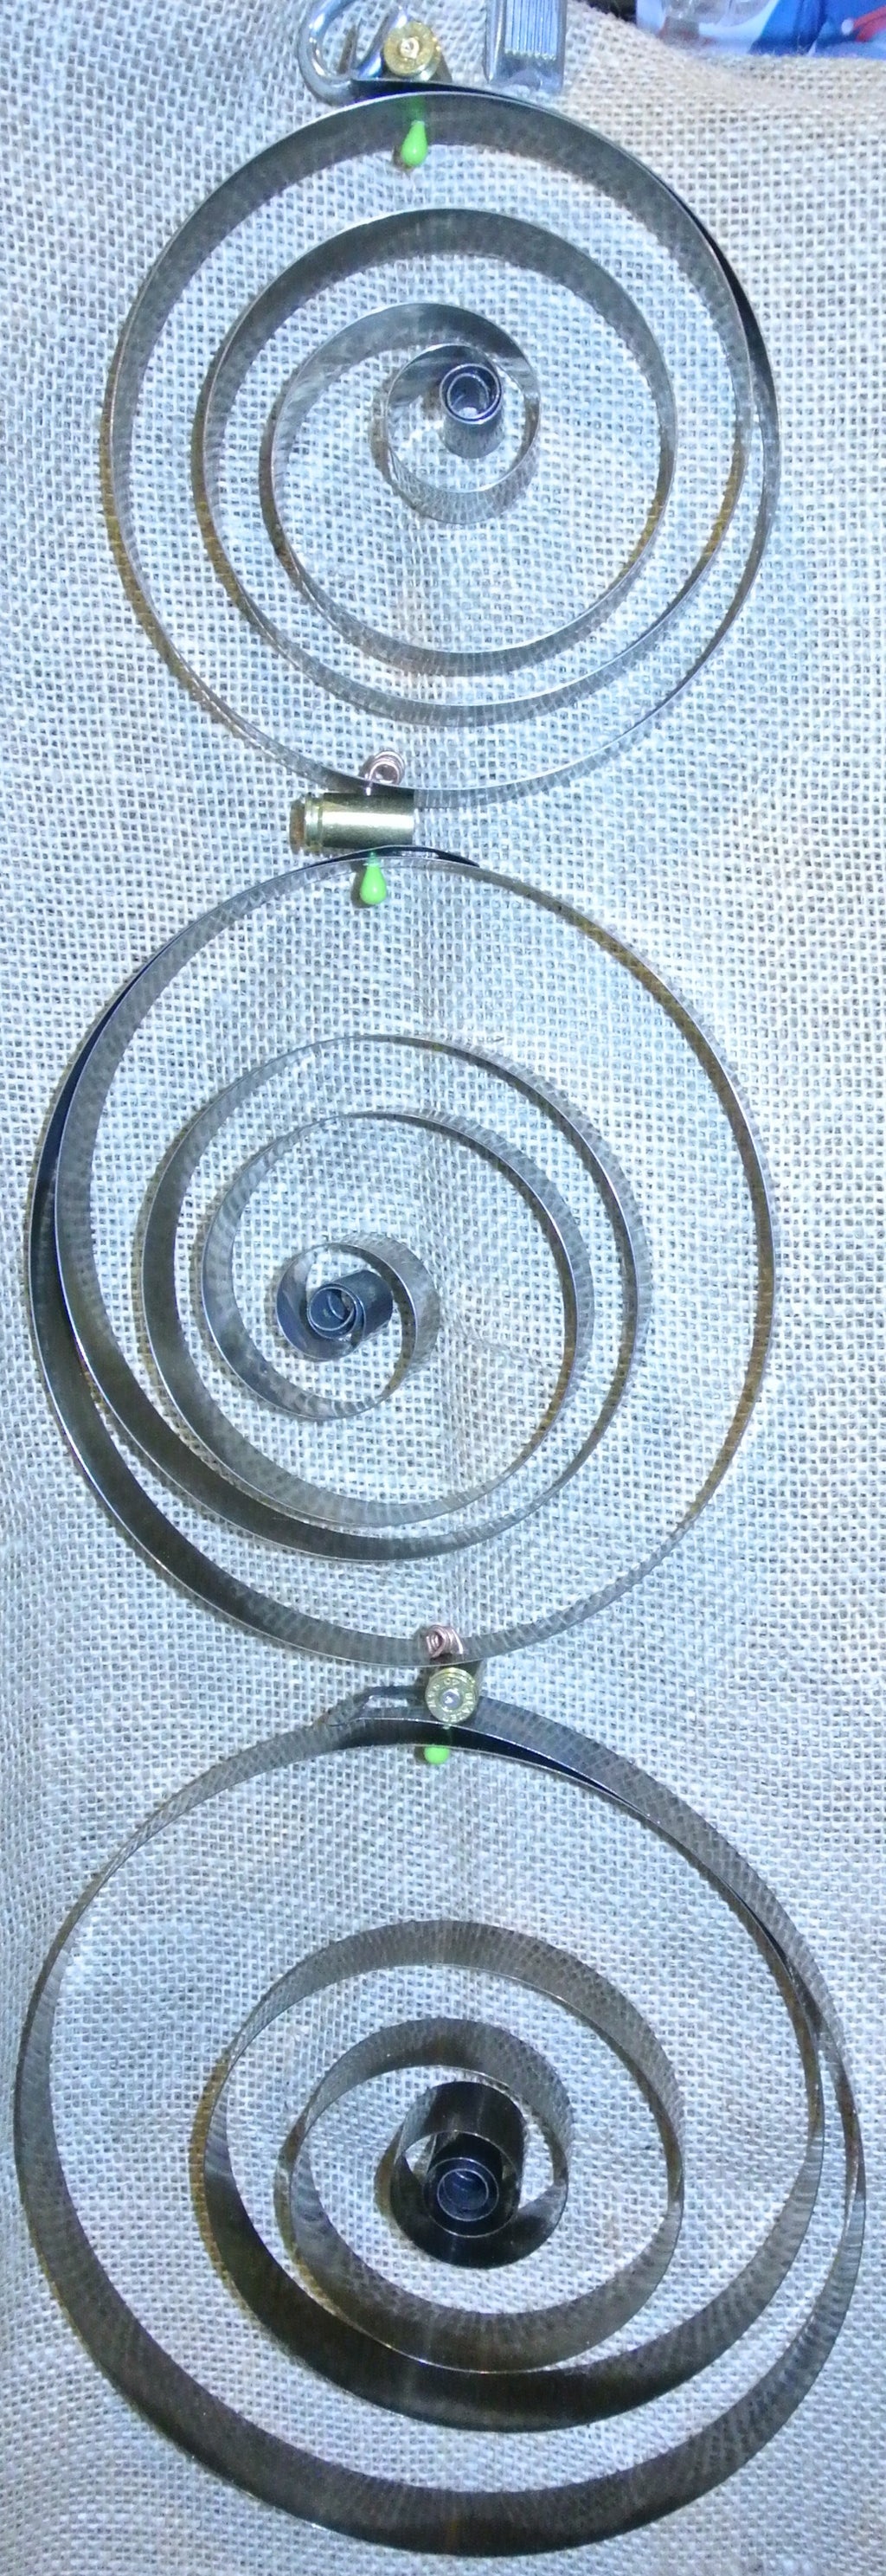 MOBILE 3 CIRCLES GREEN TIPPED COPPER HEAD PINS BULLETS IN BETWEEN S HOOK STARR WILDE STEAMPUNK HOME DECORATIONS